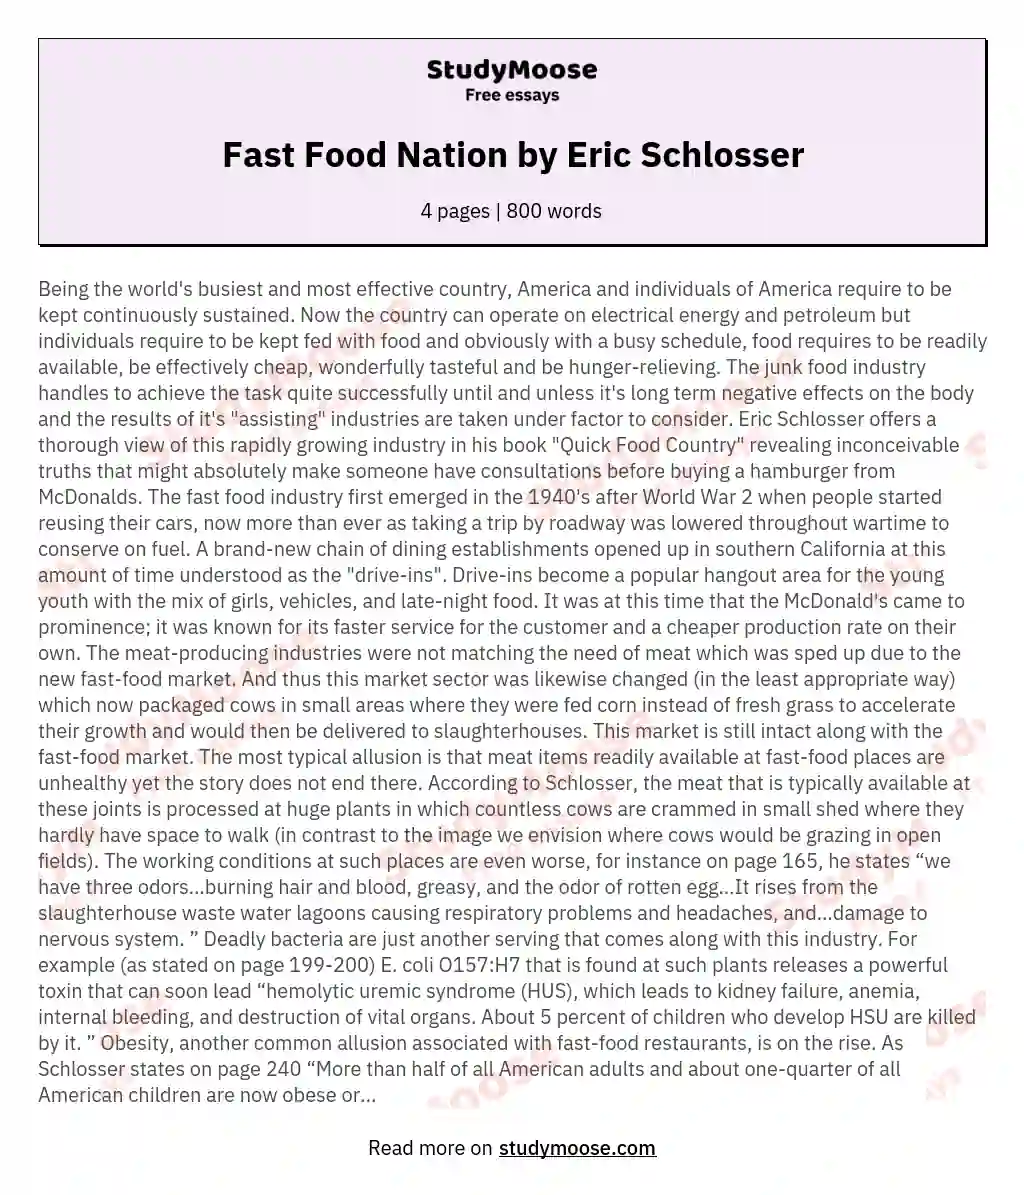 Fast Food Nation by Eric Schlosser essay